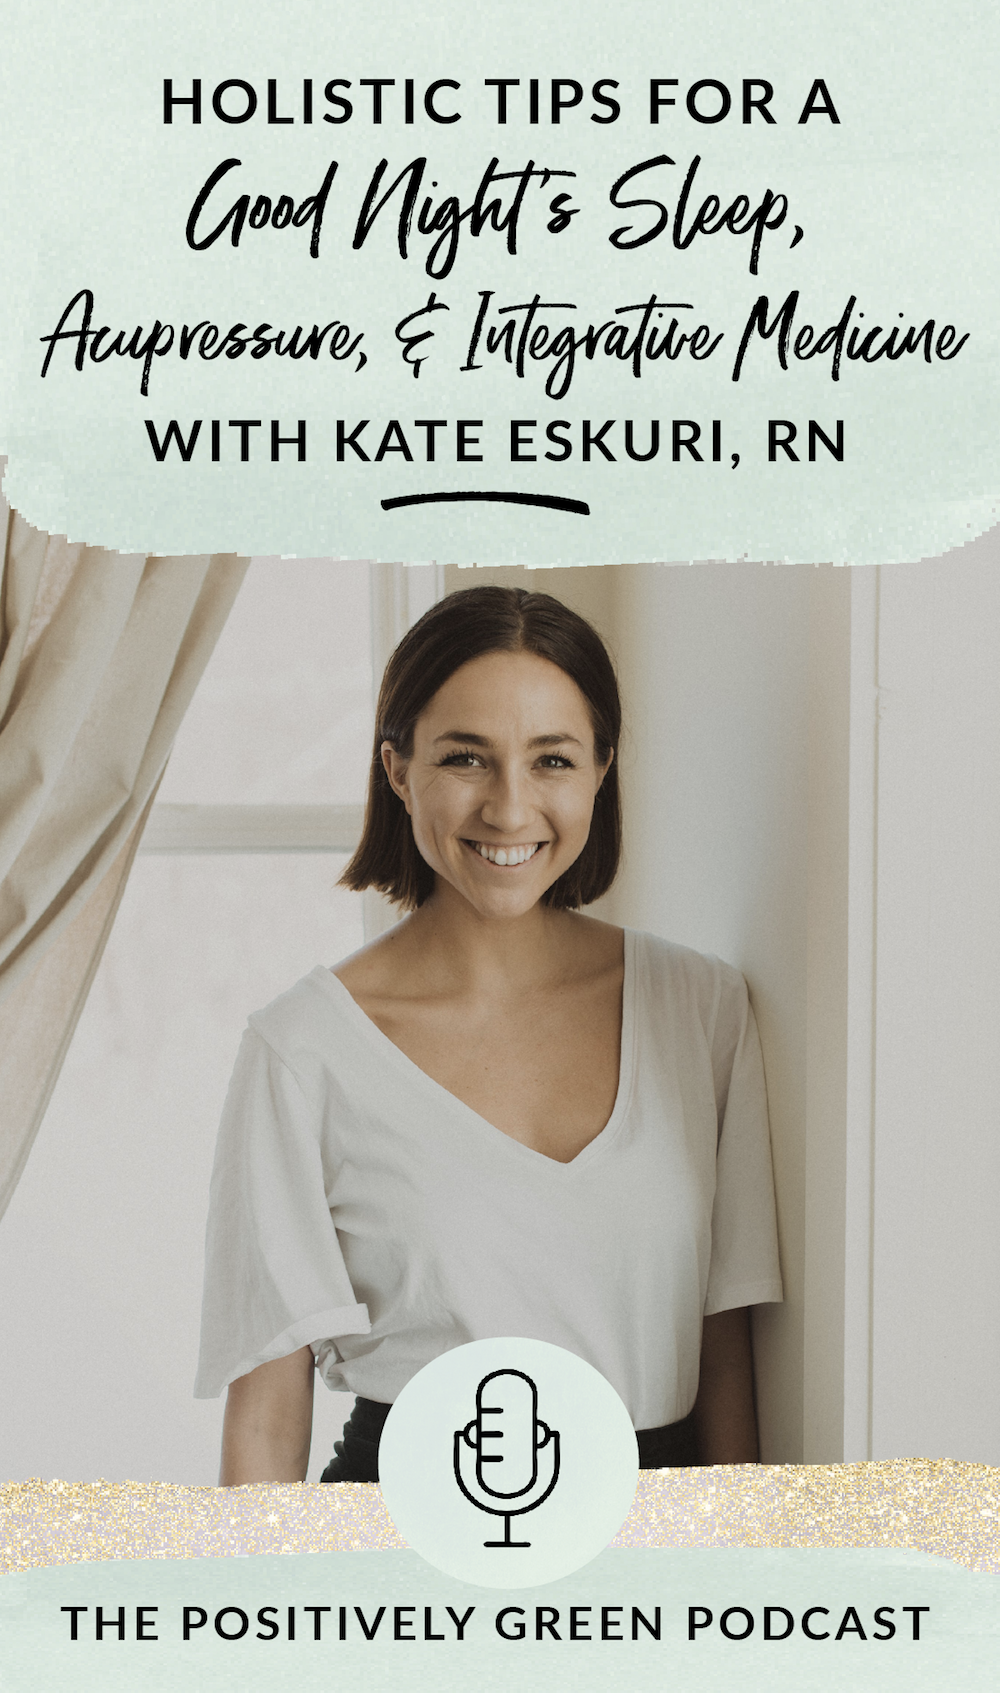 Holistic tips for a good night's sleep, acupressure, and integrative medicine with Kate Eskuri, Episode 21 The Positively Green Podcast